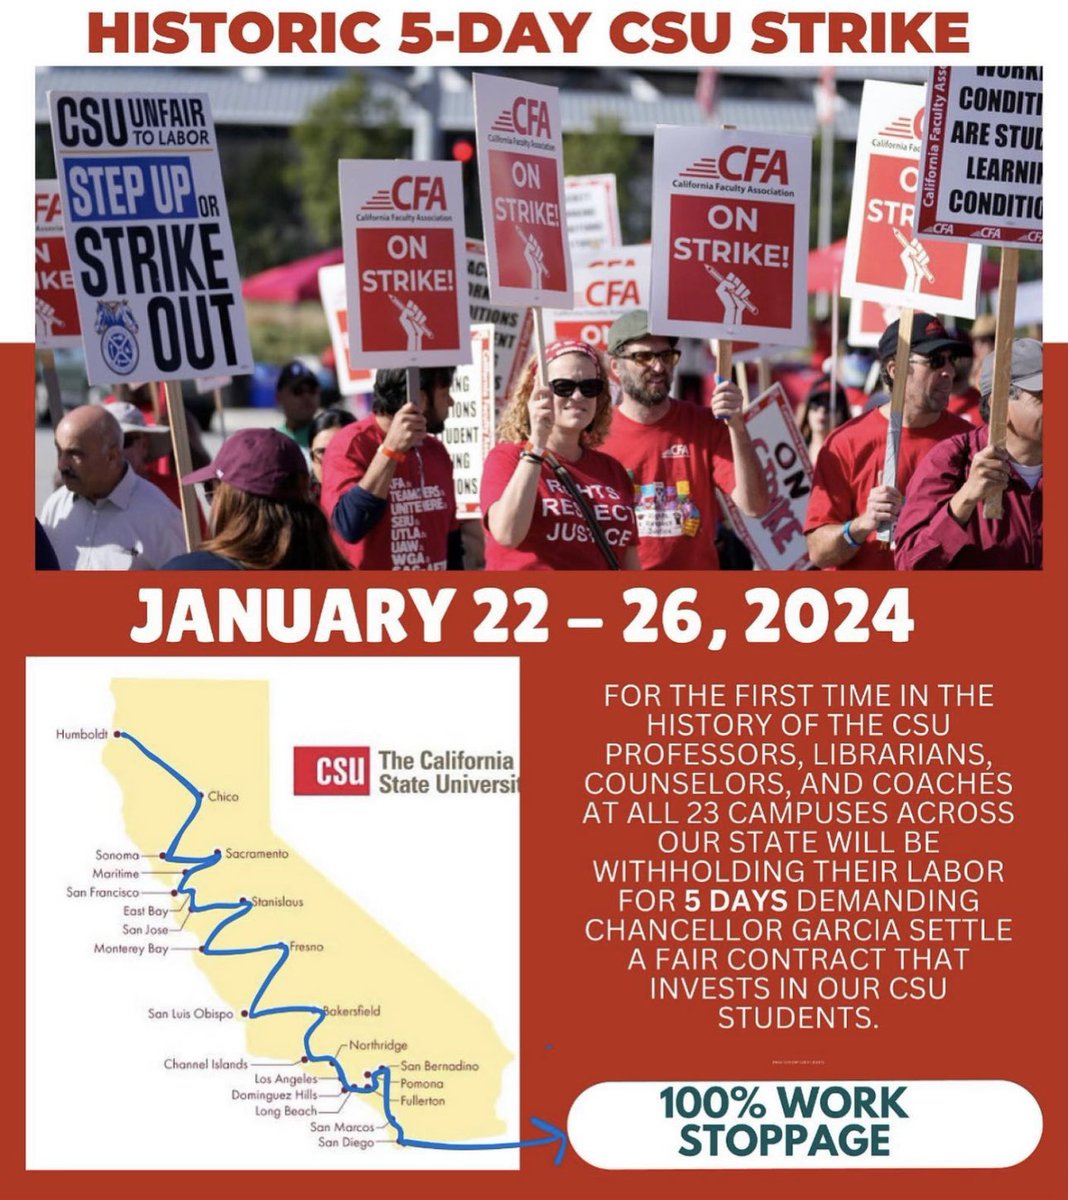 Tomorrow is the day! ALL 23 campuses for 5 days! I’ll be on the line at @ChicoState until @calstate decides to give us a fair contract the respects our knowledge, work ethic, & passion for educating our students! #RespectUsPayUs #StrikeReady #WeAreTheCSU #FacultyRising